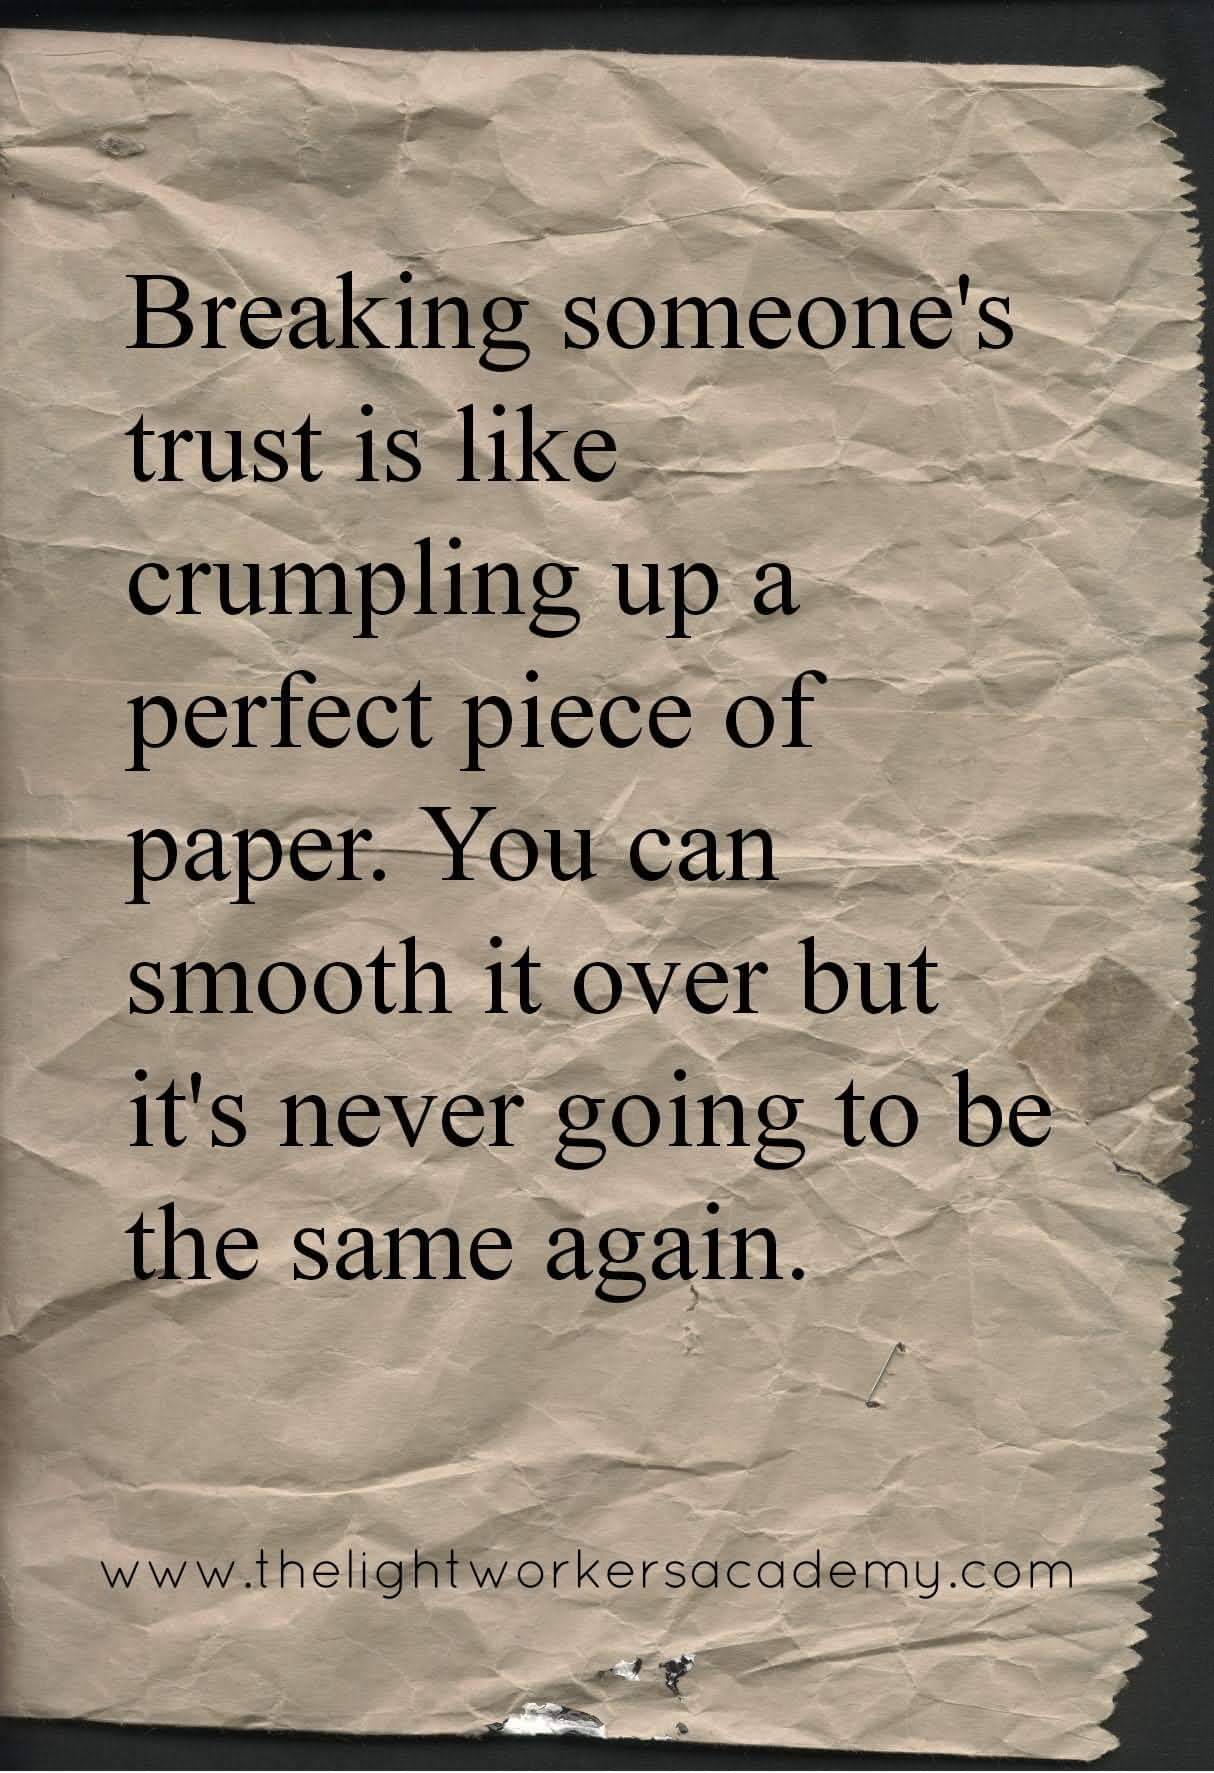 Breaking someone's trust is like crumpling up a perfect piece of paper. You can smooth it over but it is never going to be the same again